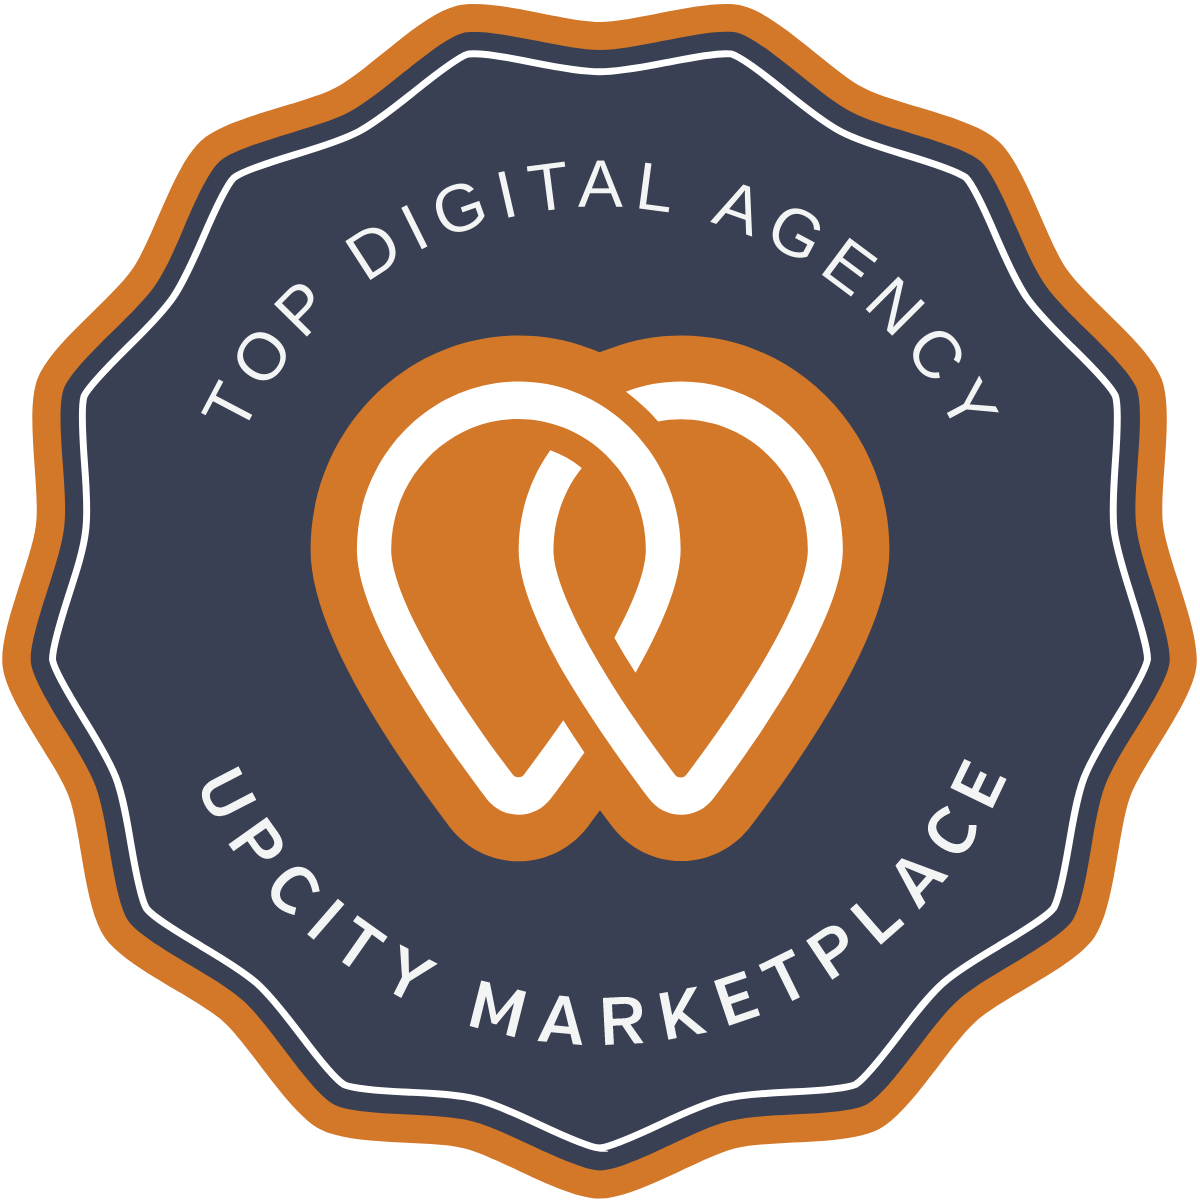 PageTraffic Inc Announced as a Top Chicago Digital Marketing Agency by UpCity